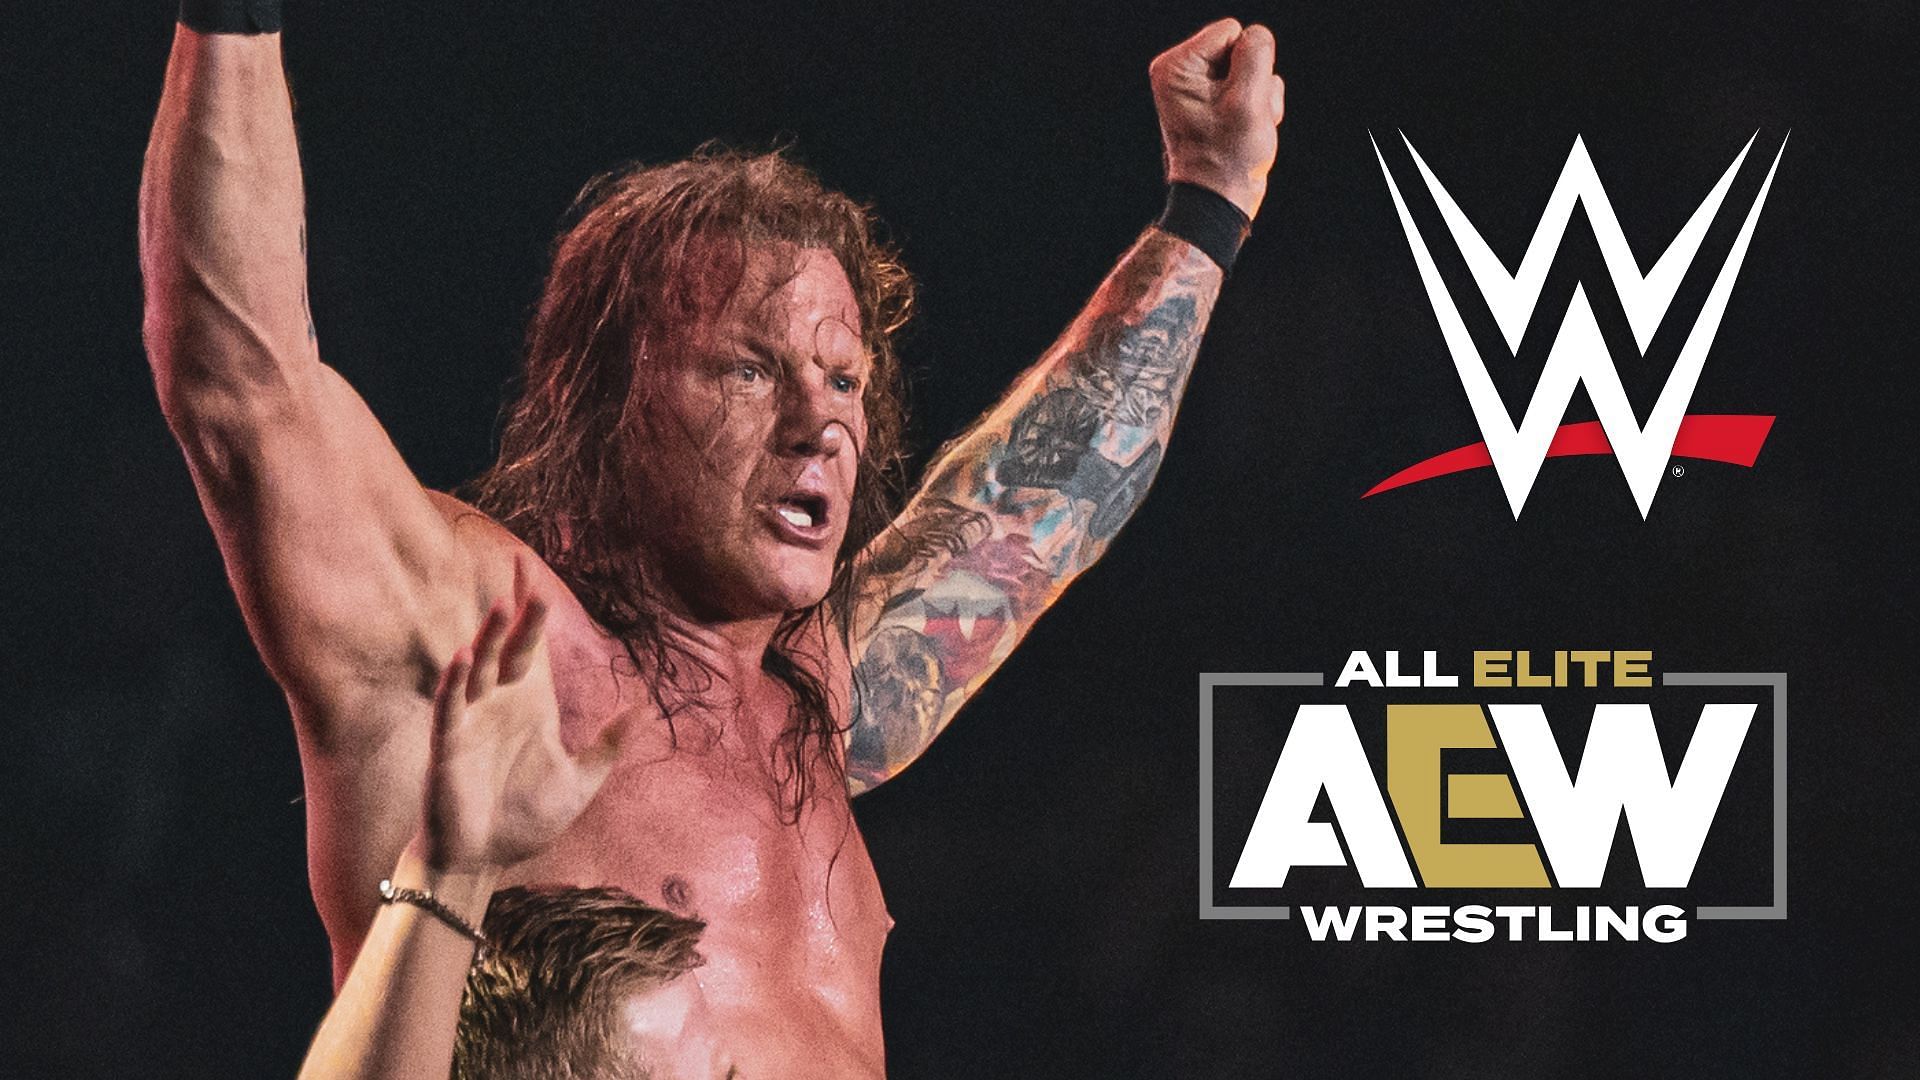 A WWE legend has given his respect to AEW star Chris Jericho